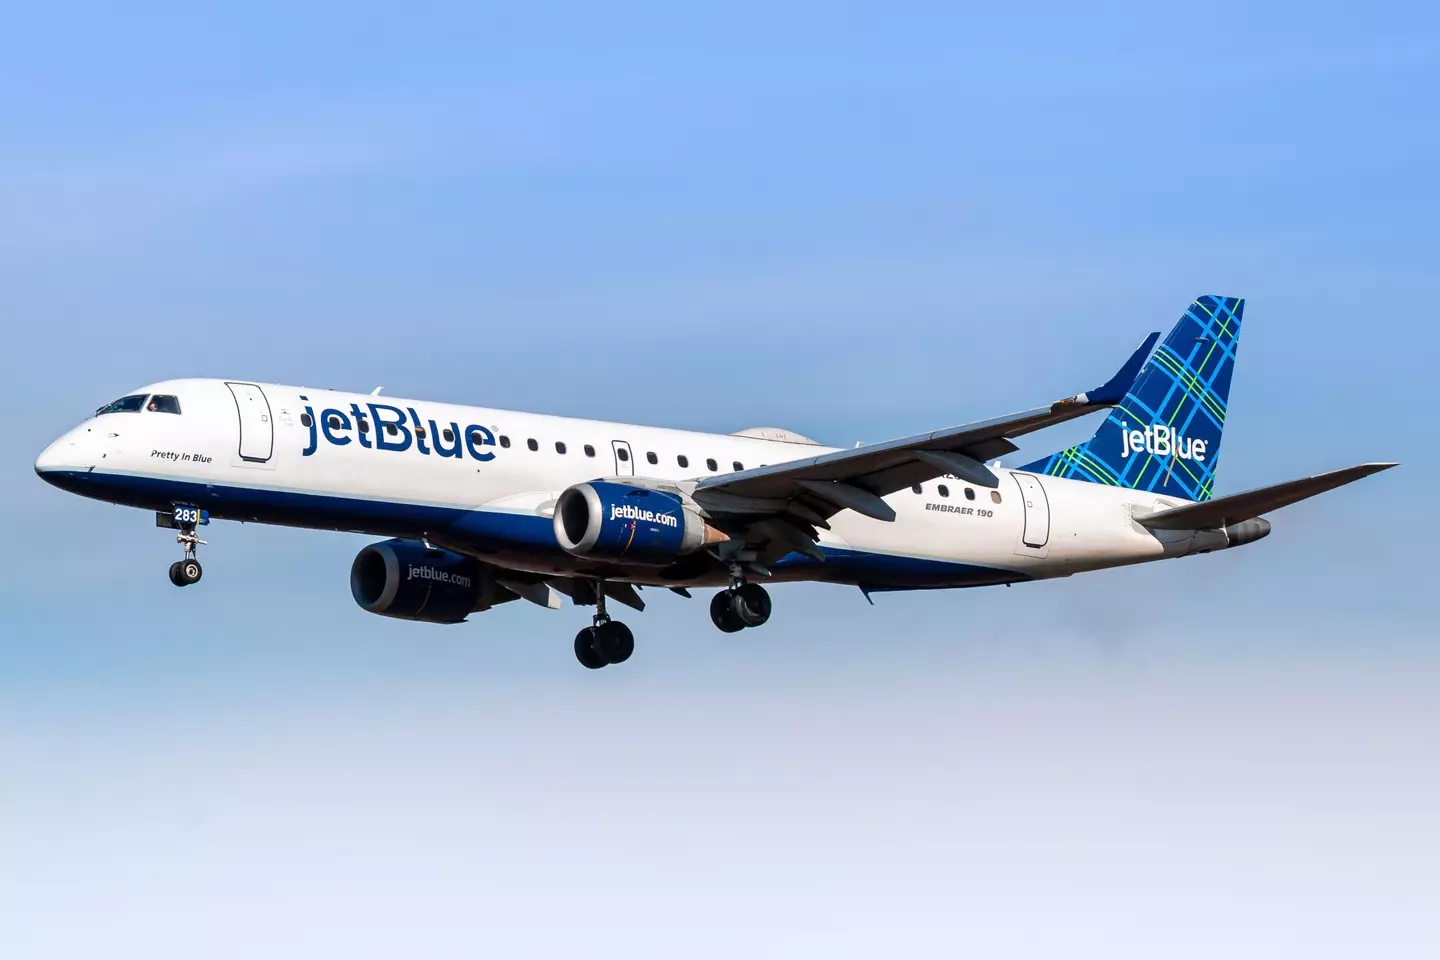 JetBlue offered passengers $10,000 in flight credit.